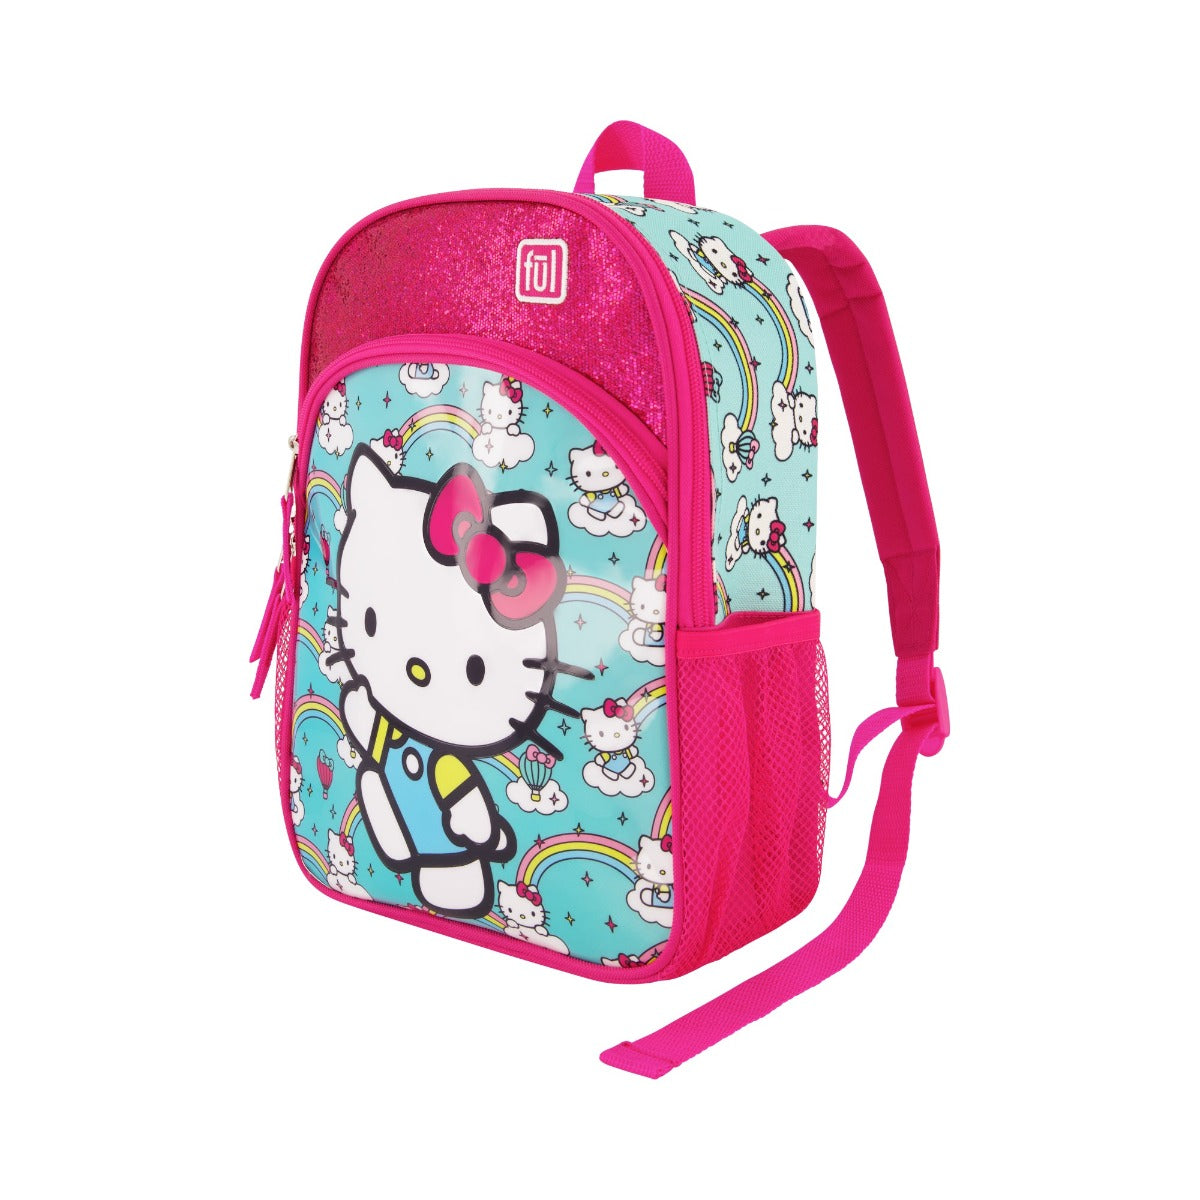 Hello Kitty Ful Rainbows matching 2 piece set - kids 13" carry on backpack for traveling